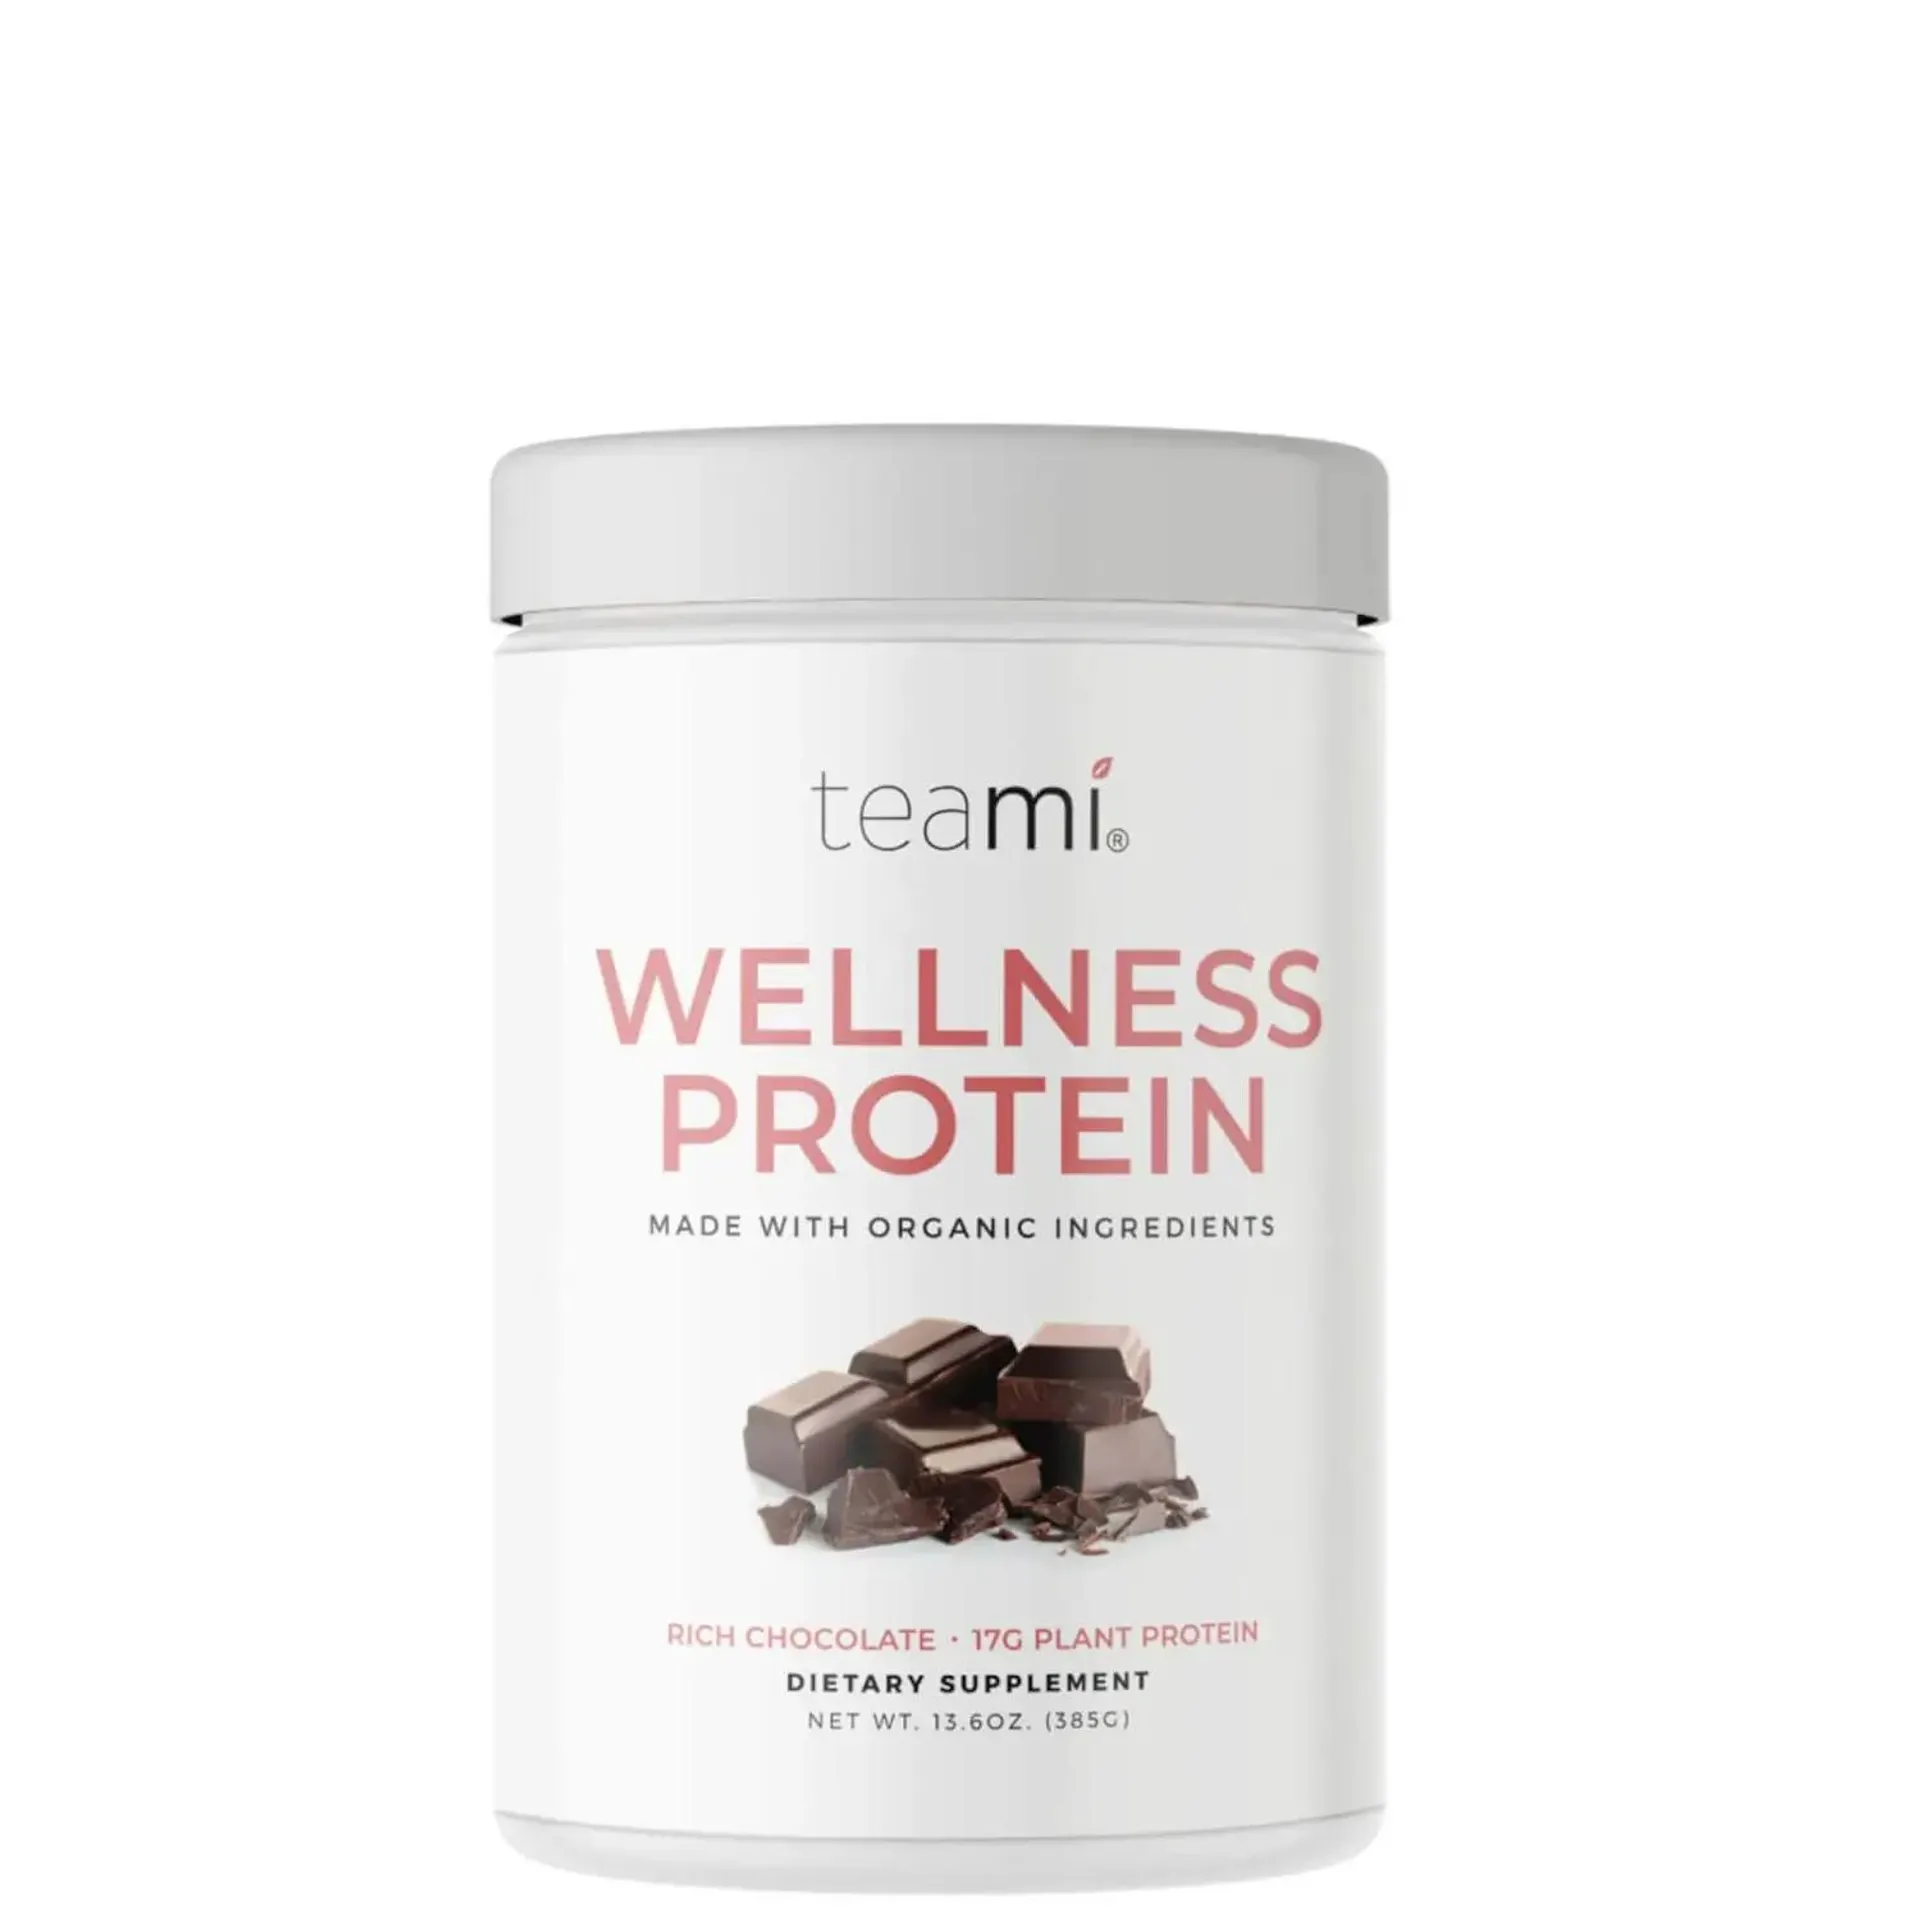 Teami Plant Based Wellness Protein - Rich Chocolate